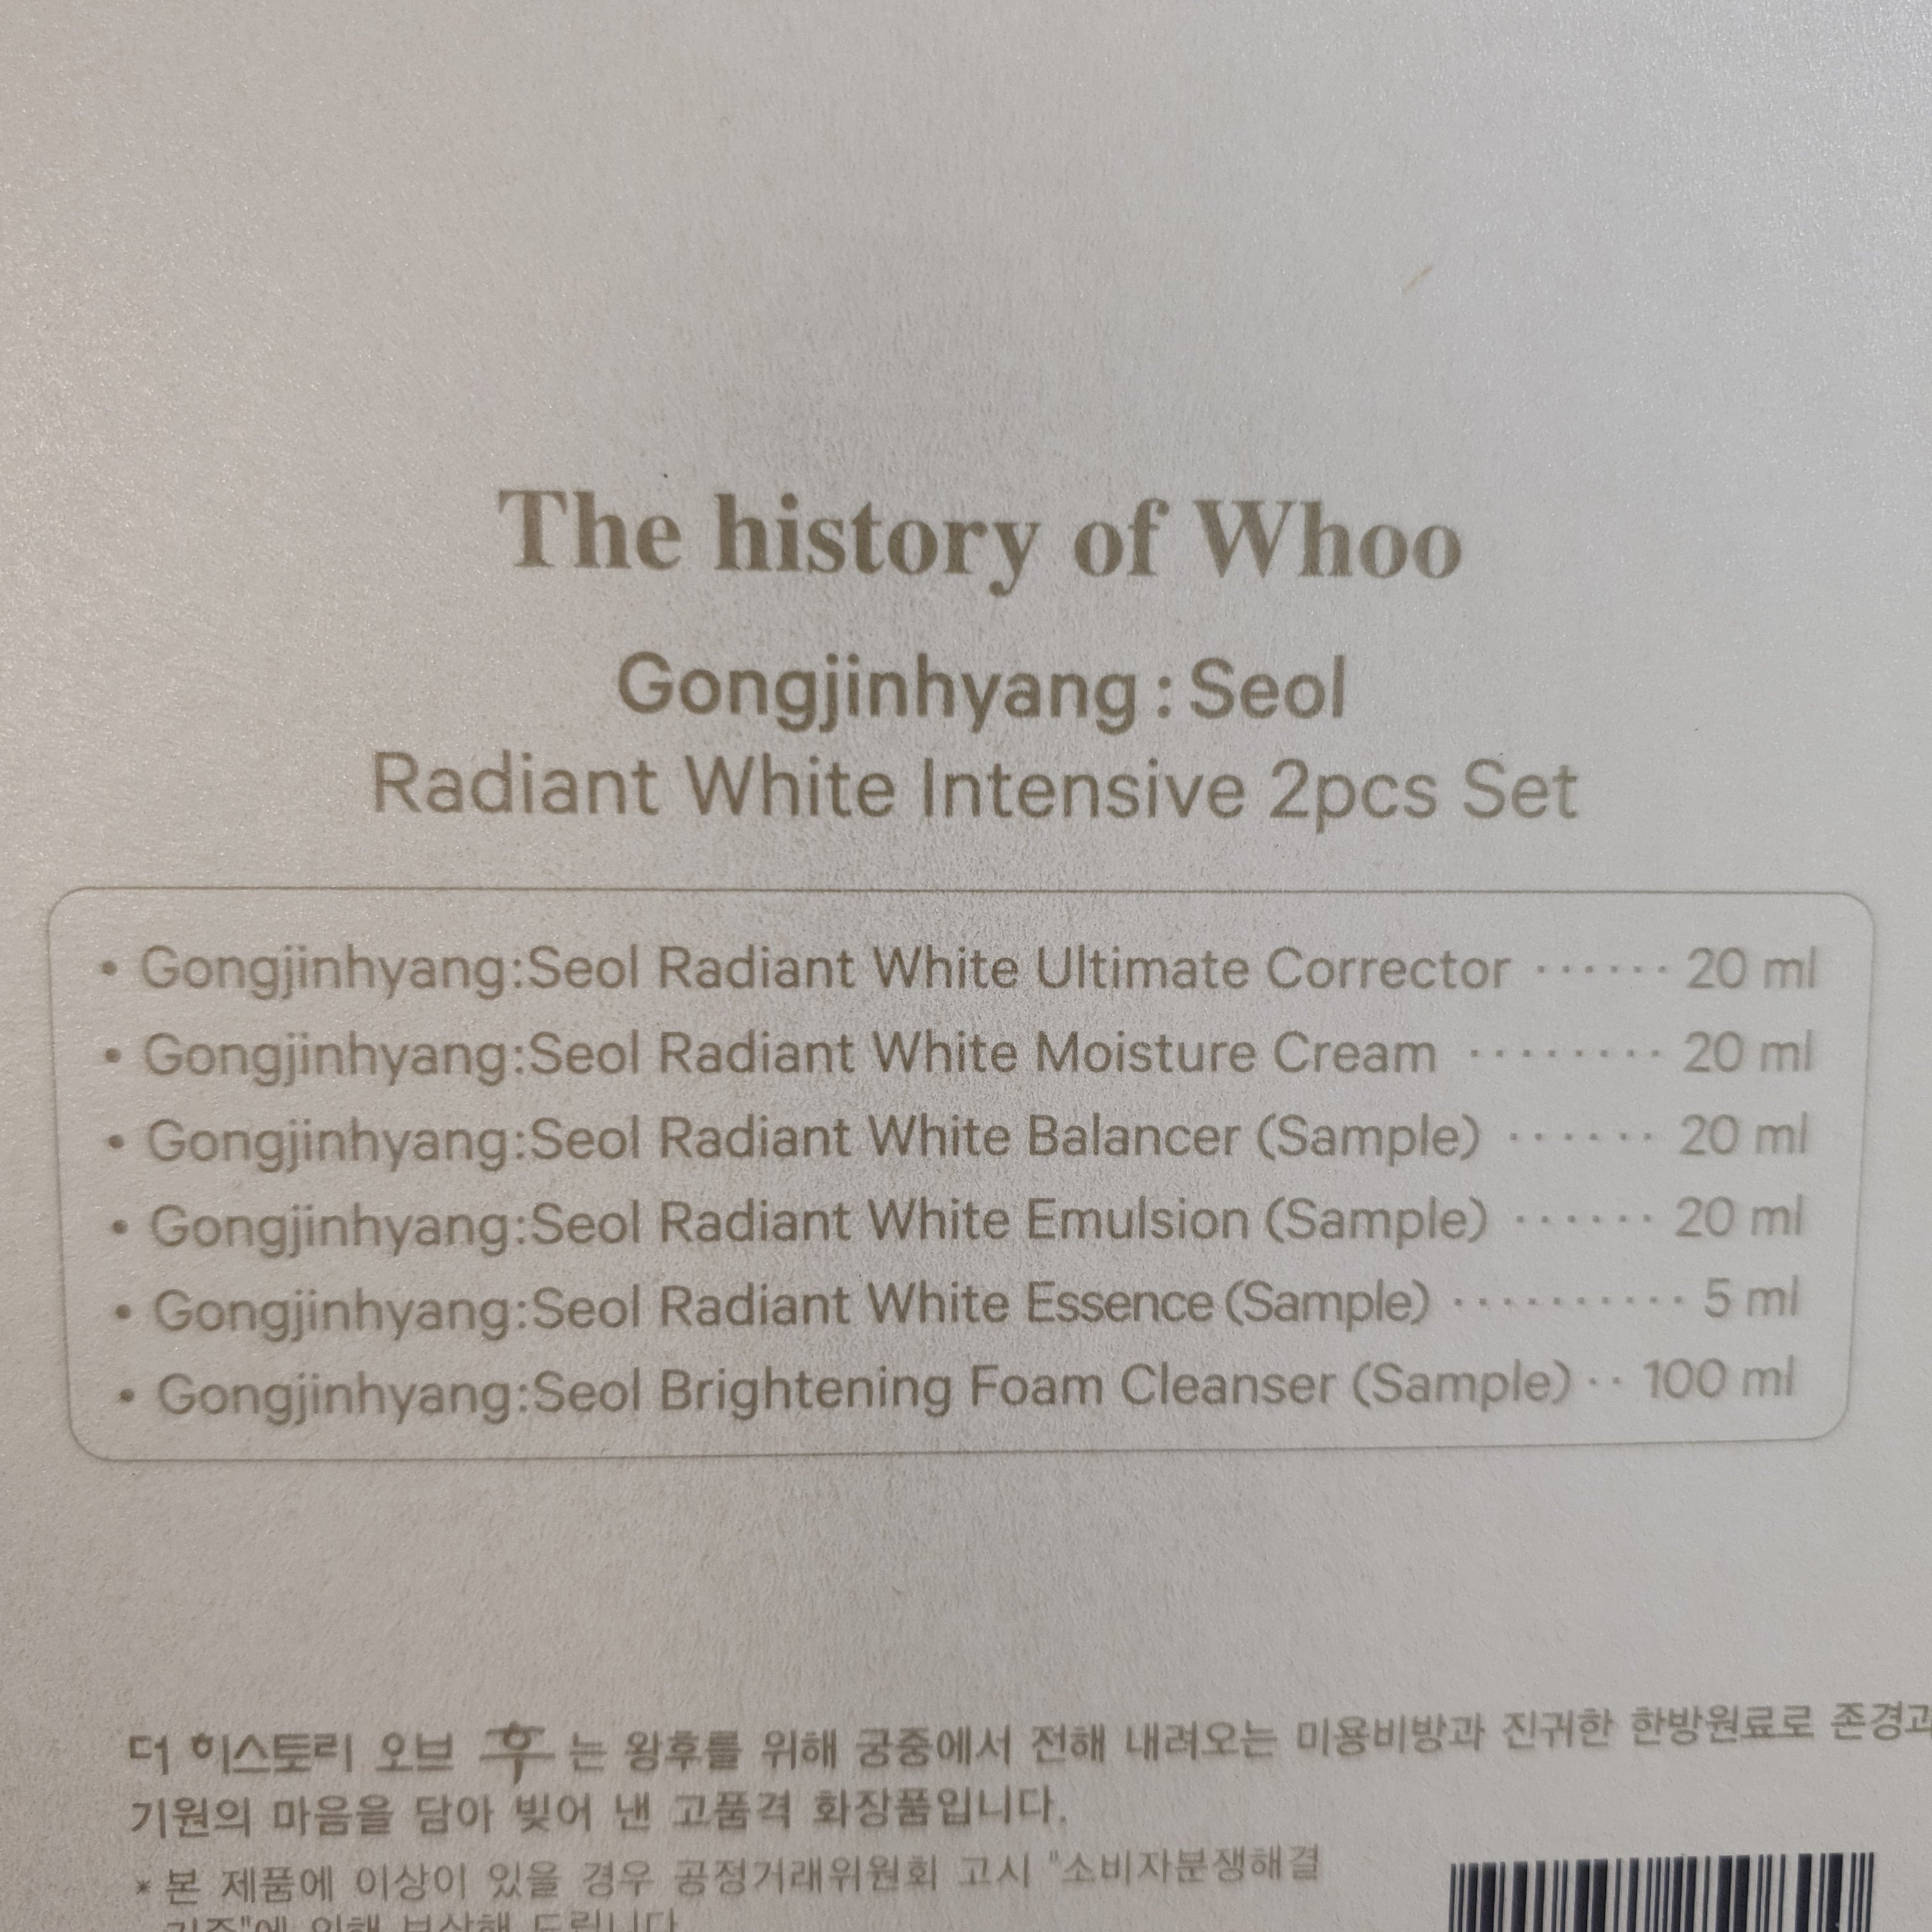 The History of Whoo Gongjinhyang: Seol Radiant White Intensive 2pcs Set